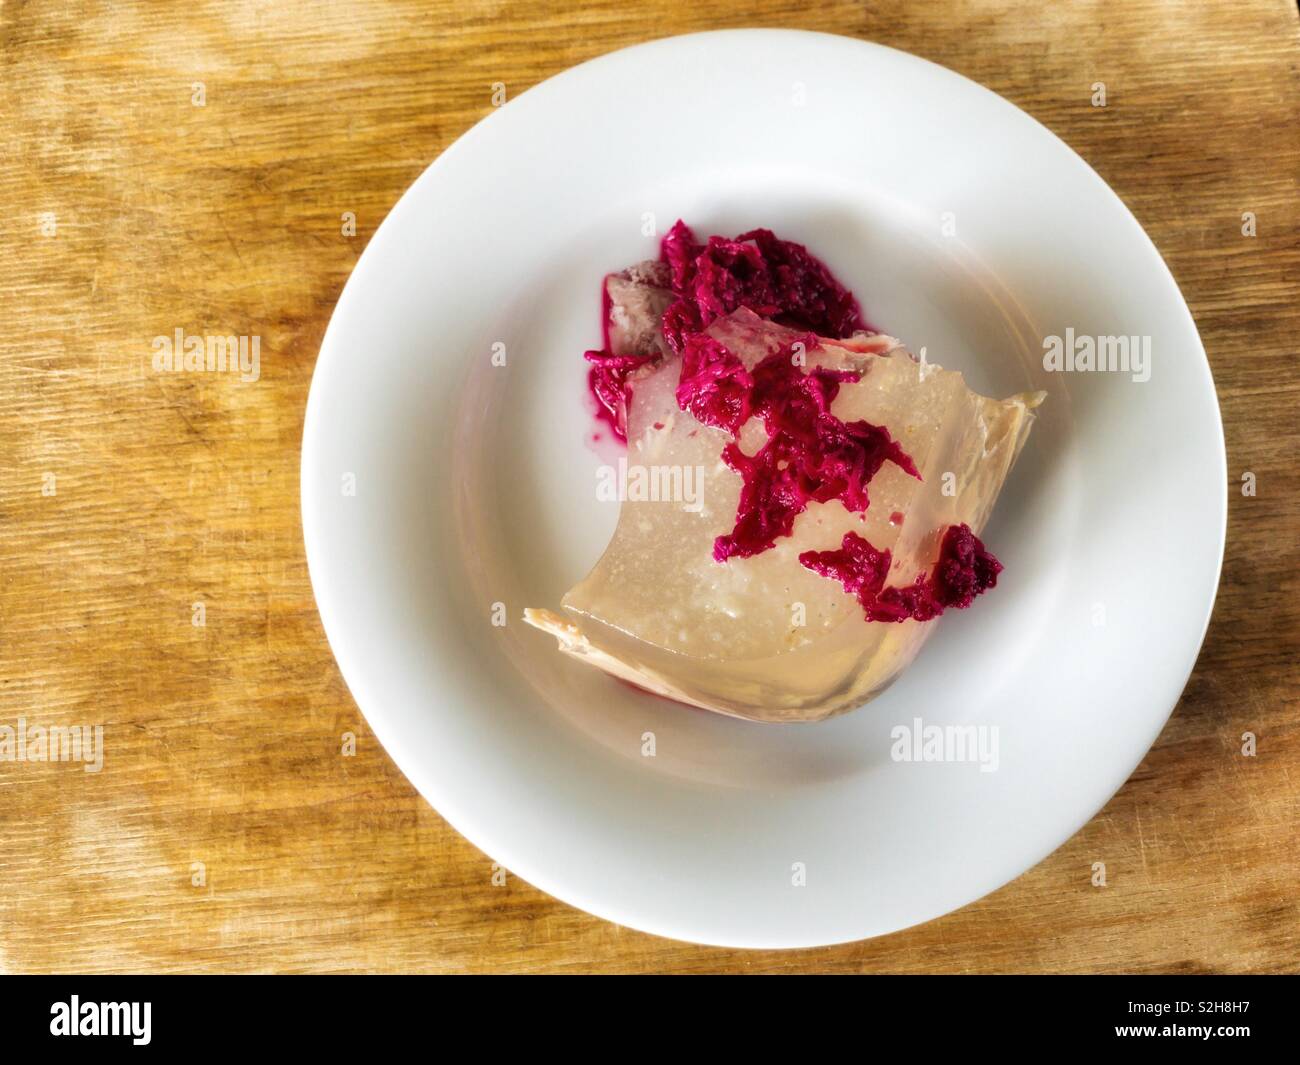 Plate with Ukrainian aspic flavored with horse-radish pickled in beetroot juice standing on wooden surface Stock Photo